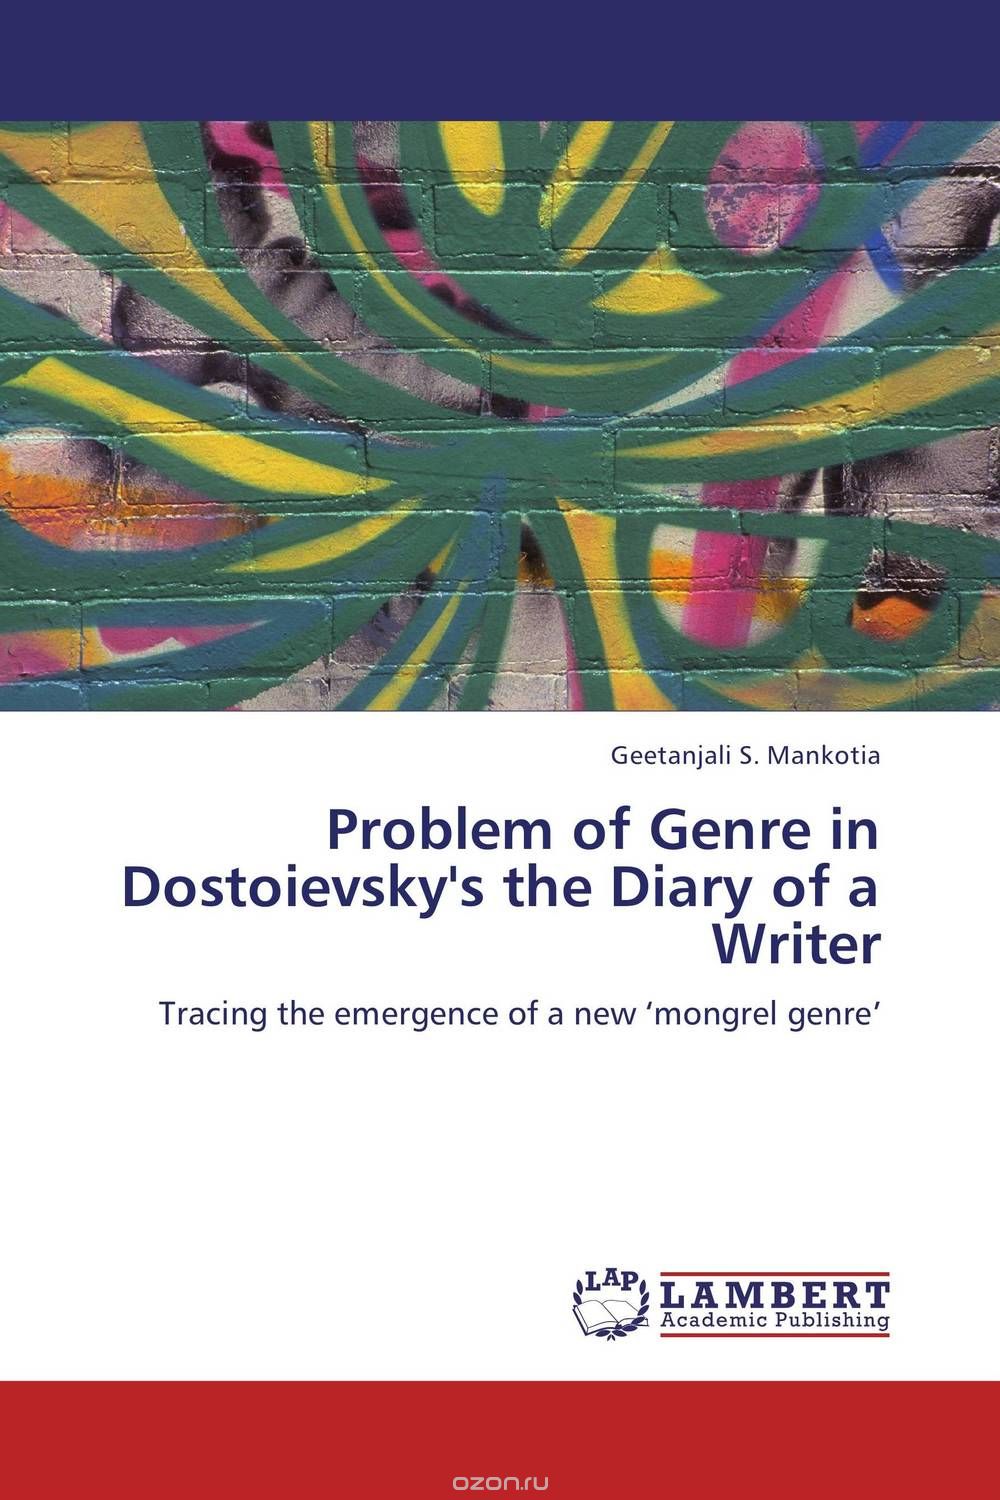 Problem of Genre in Dostoievsky's the Diary of a Writer